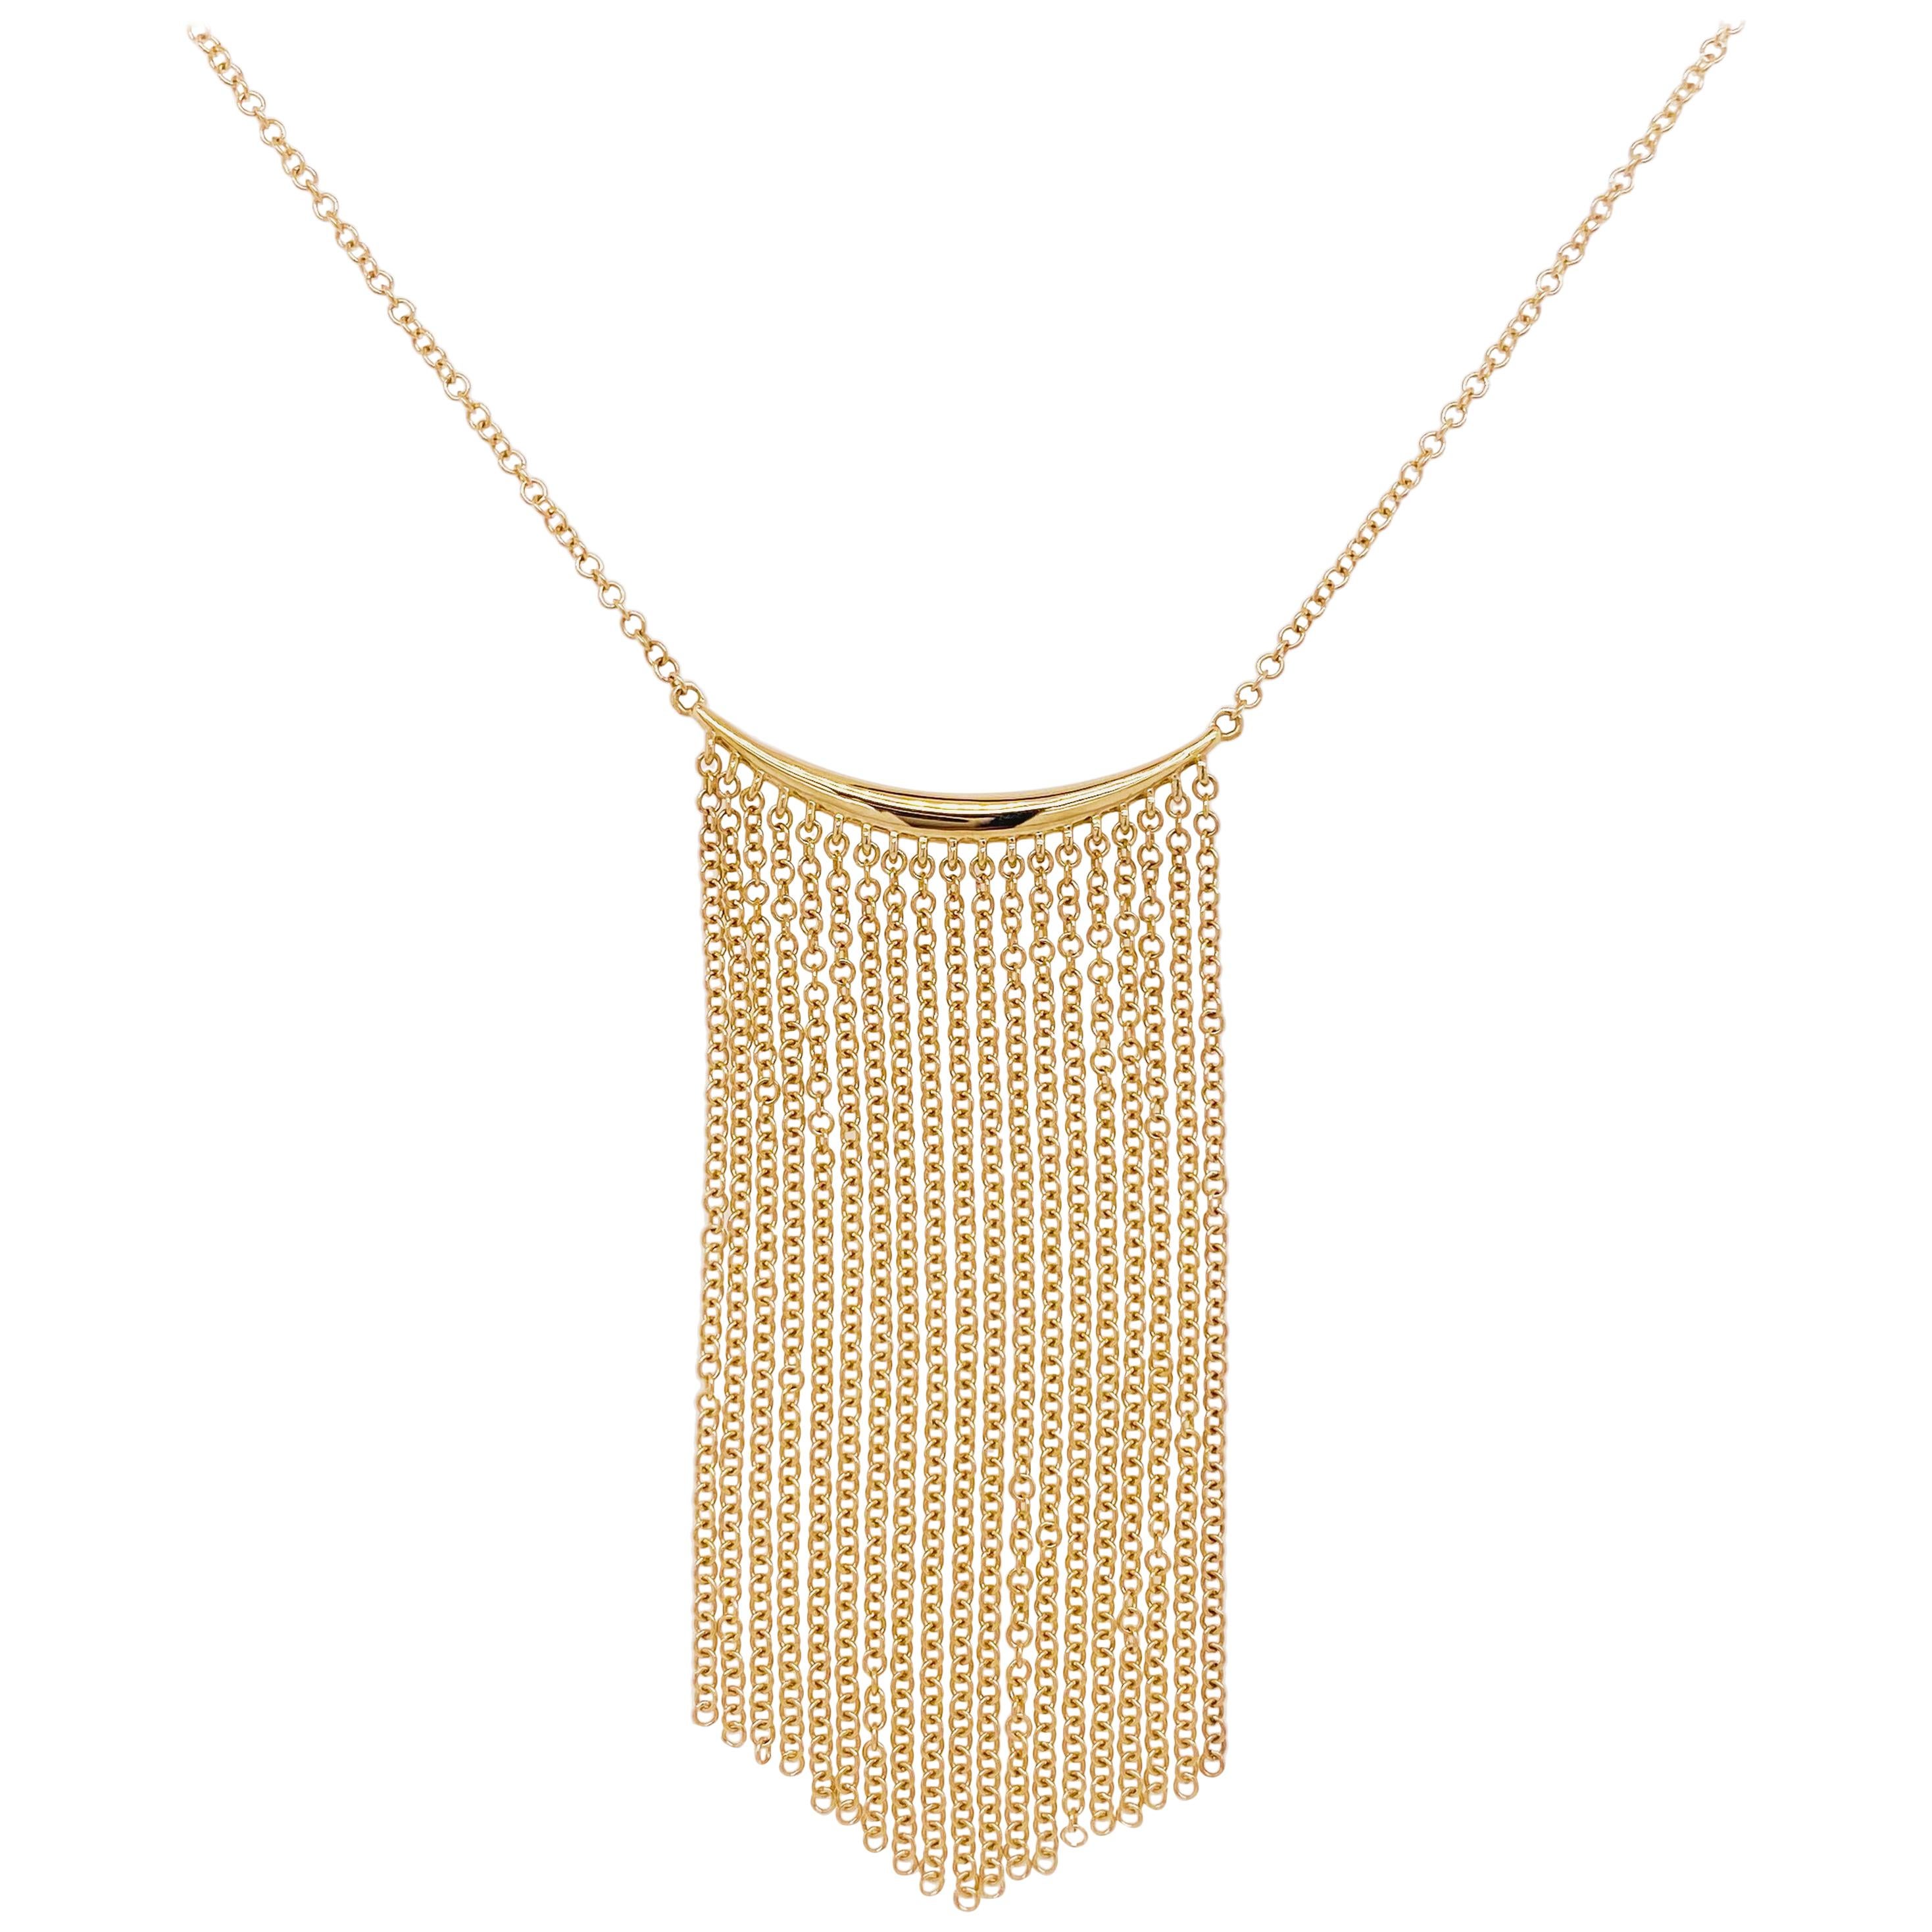 Waterfall Chain Necklace, 14 Karat Yellow Gold Curved Bar, NeckMess